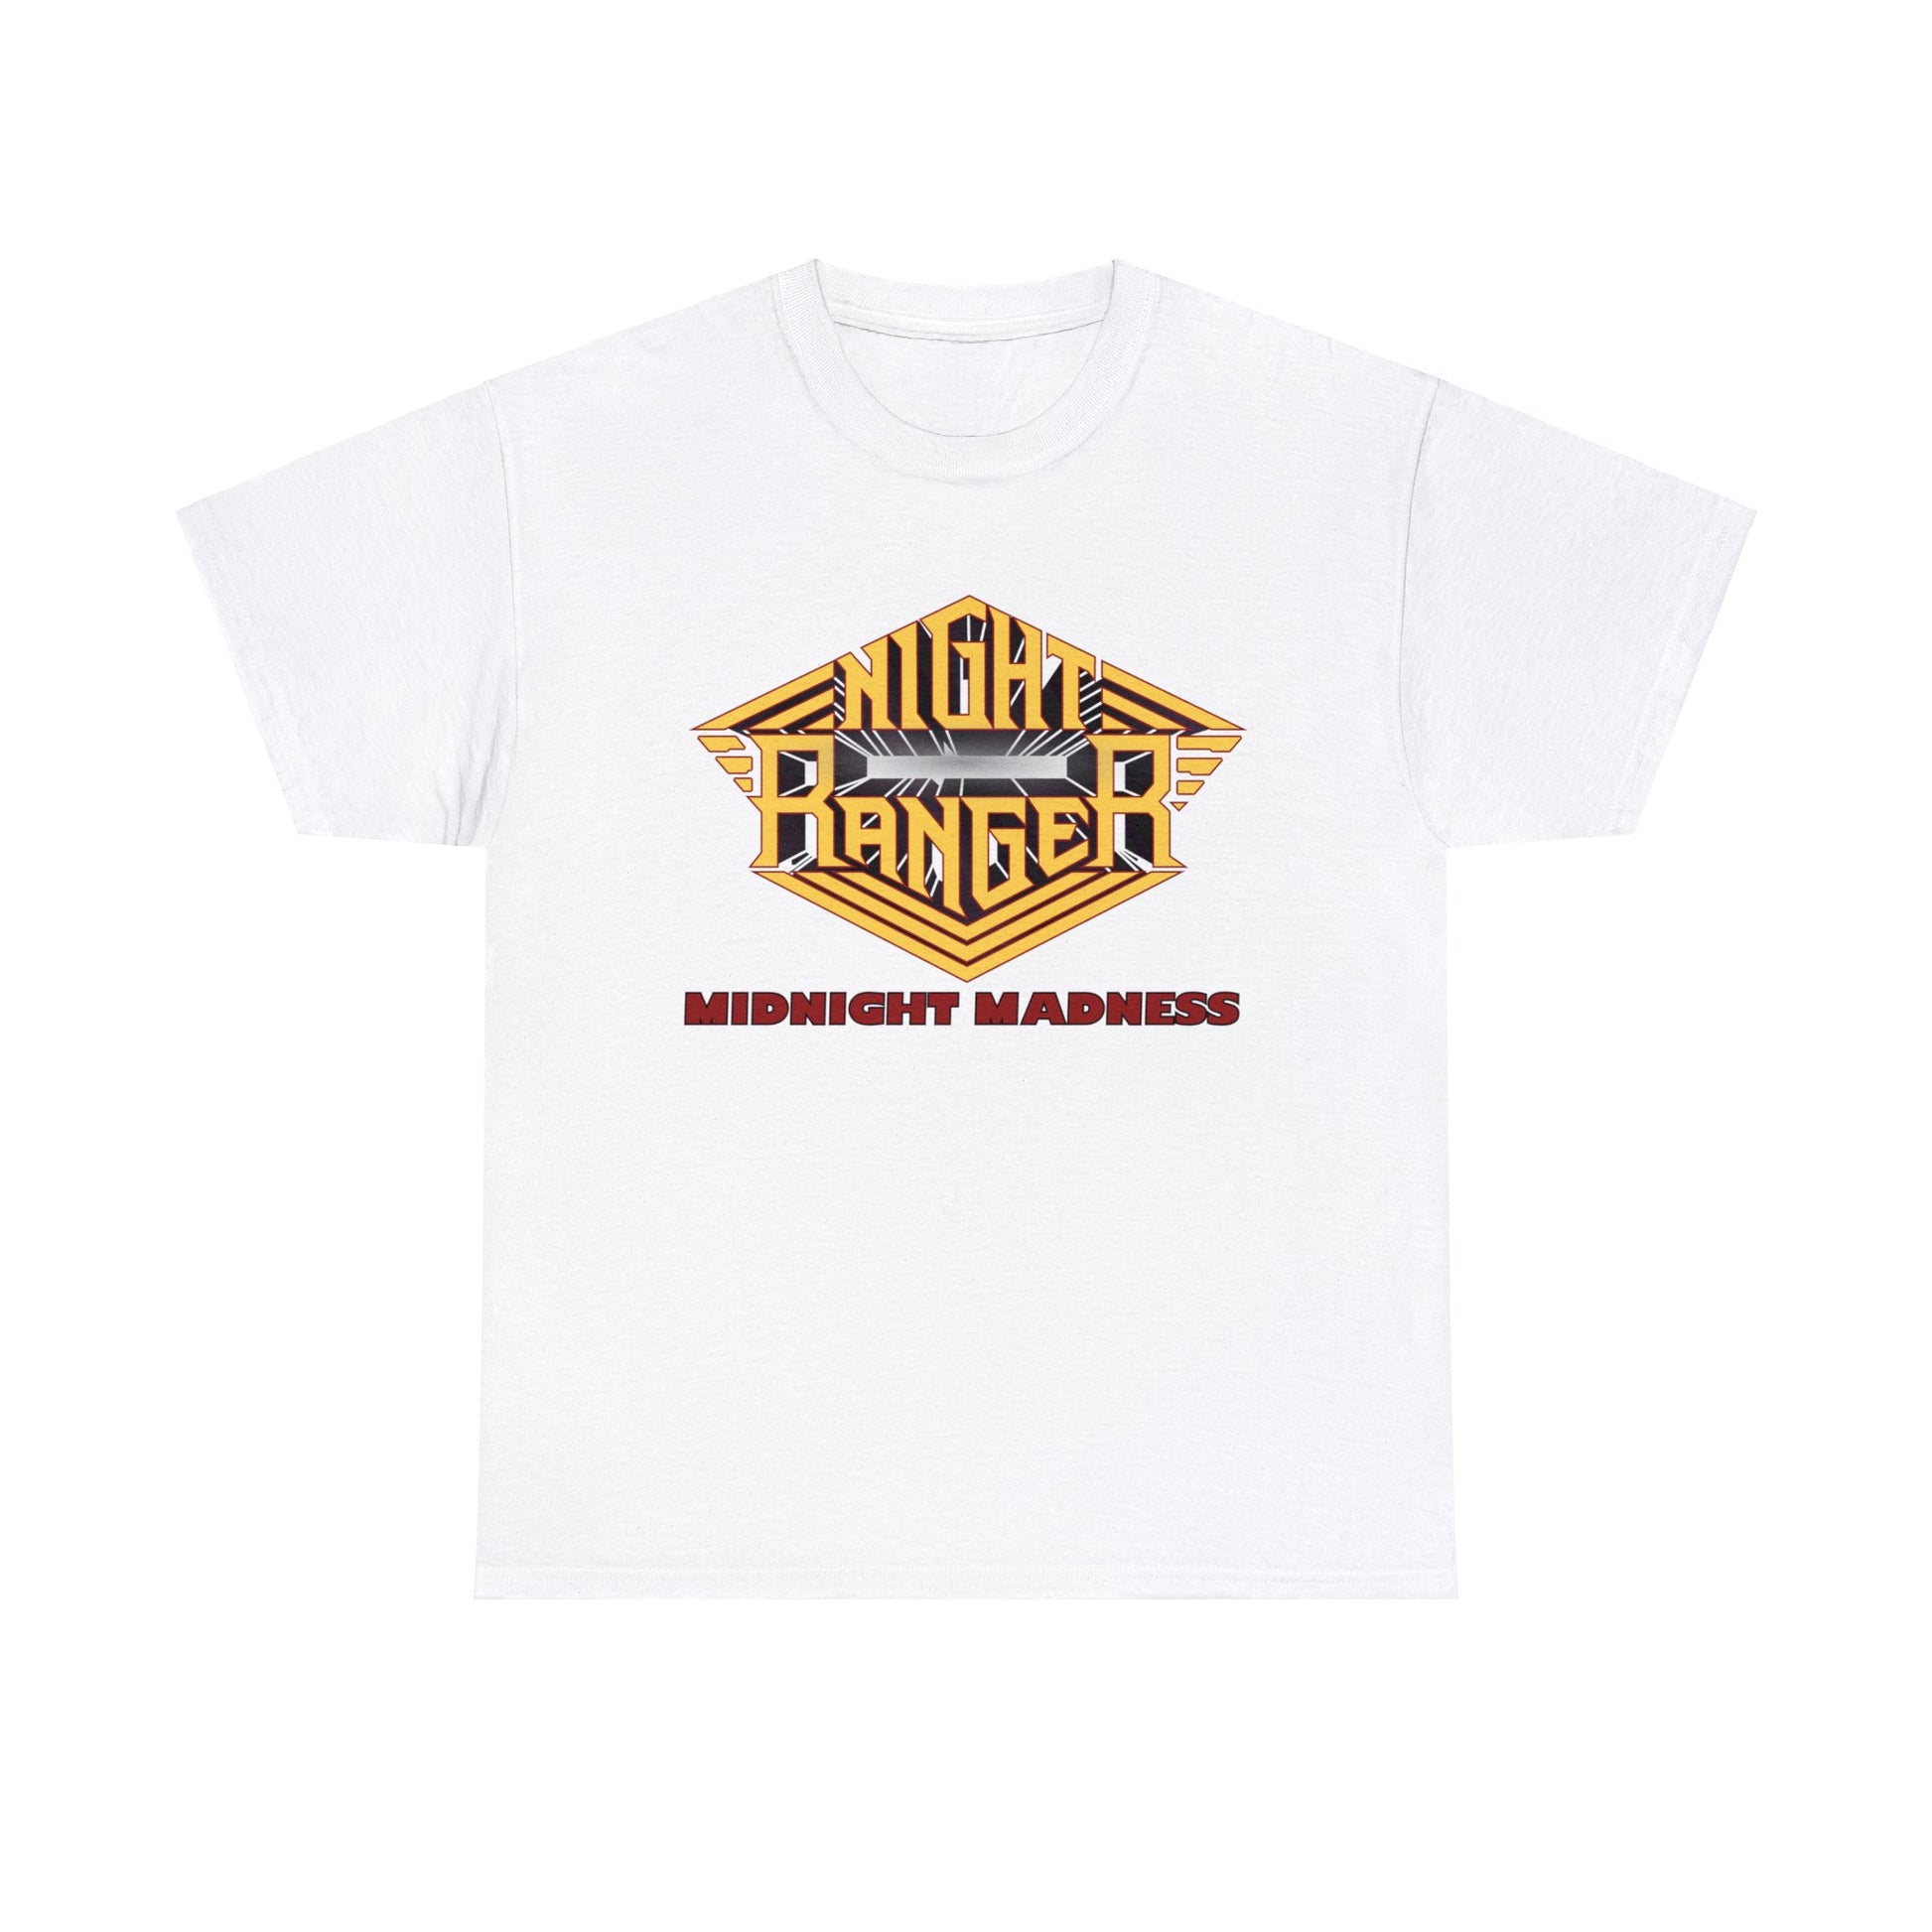 Night Ranger Midnight Madness Tour 1984 T-shirt for Sale